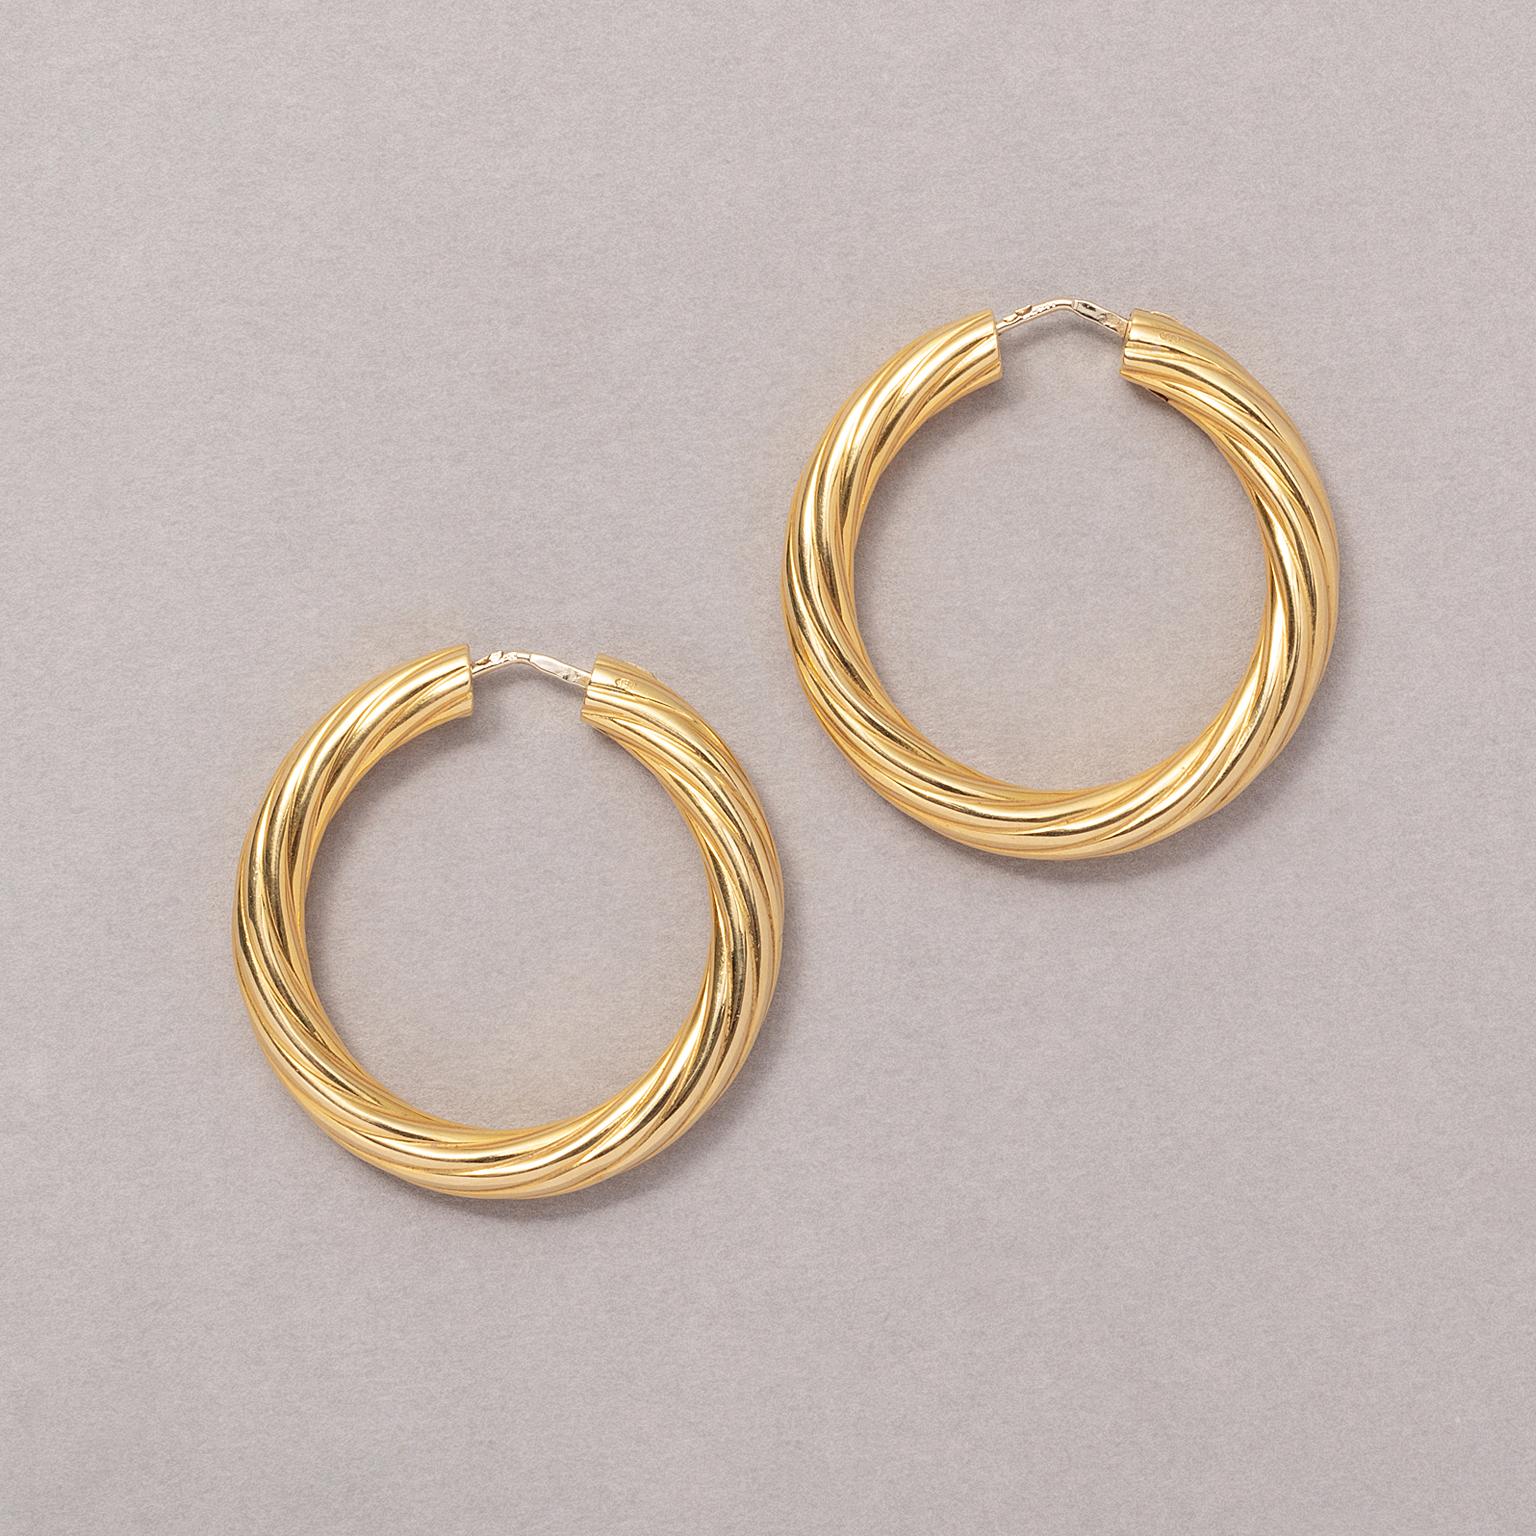 A pair of large, twisted, 18 carat yellow gold hoop earrings, signed Fred, Paris.

weight: 14.1 grams
diameter: 41 mm
width: 5.7 mm